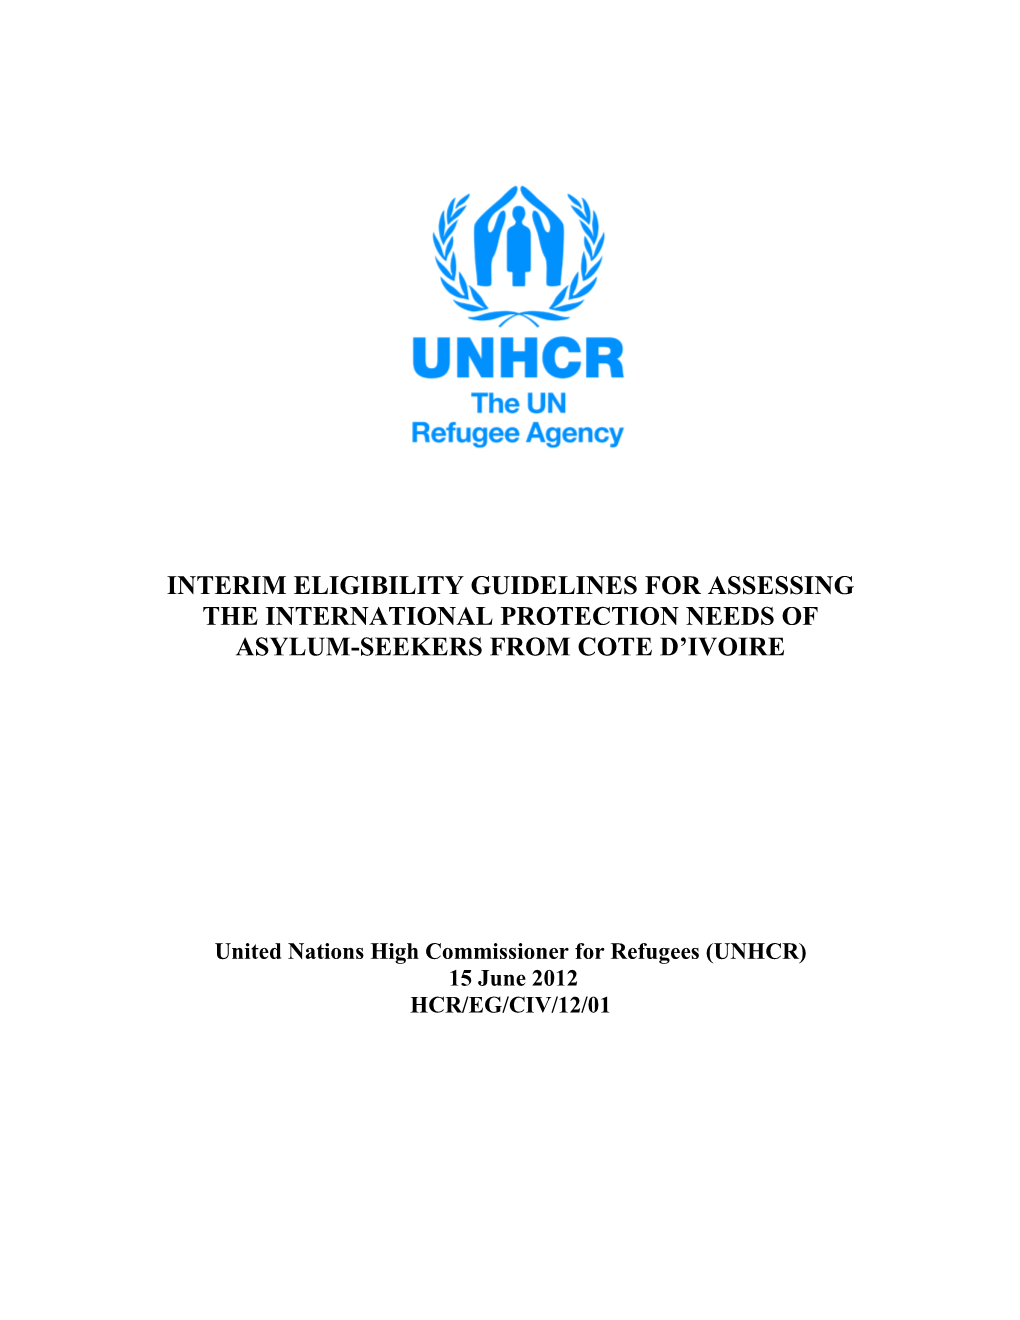 Interim Eligibility Guidelines for Assessing the International Protection Needs of Asylum-Seekers from Cote D'ivoire